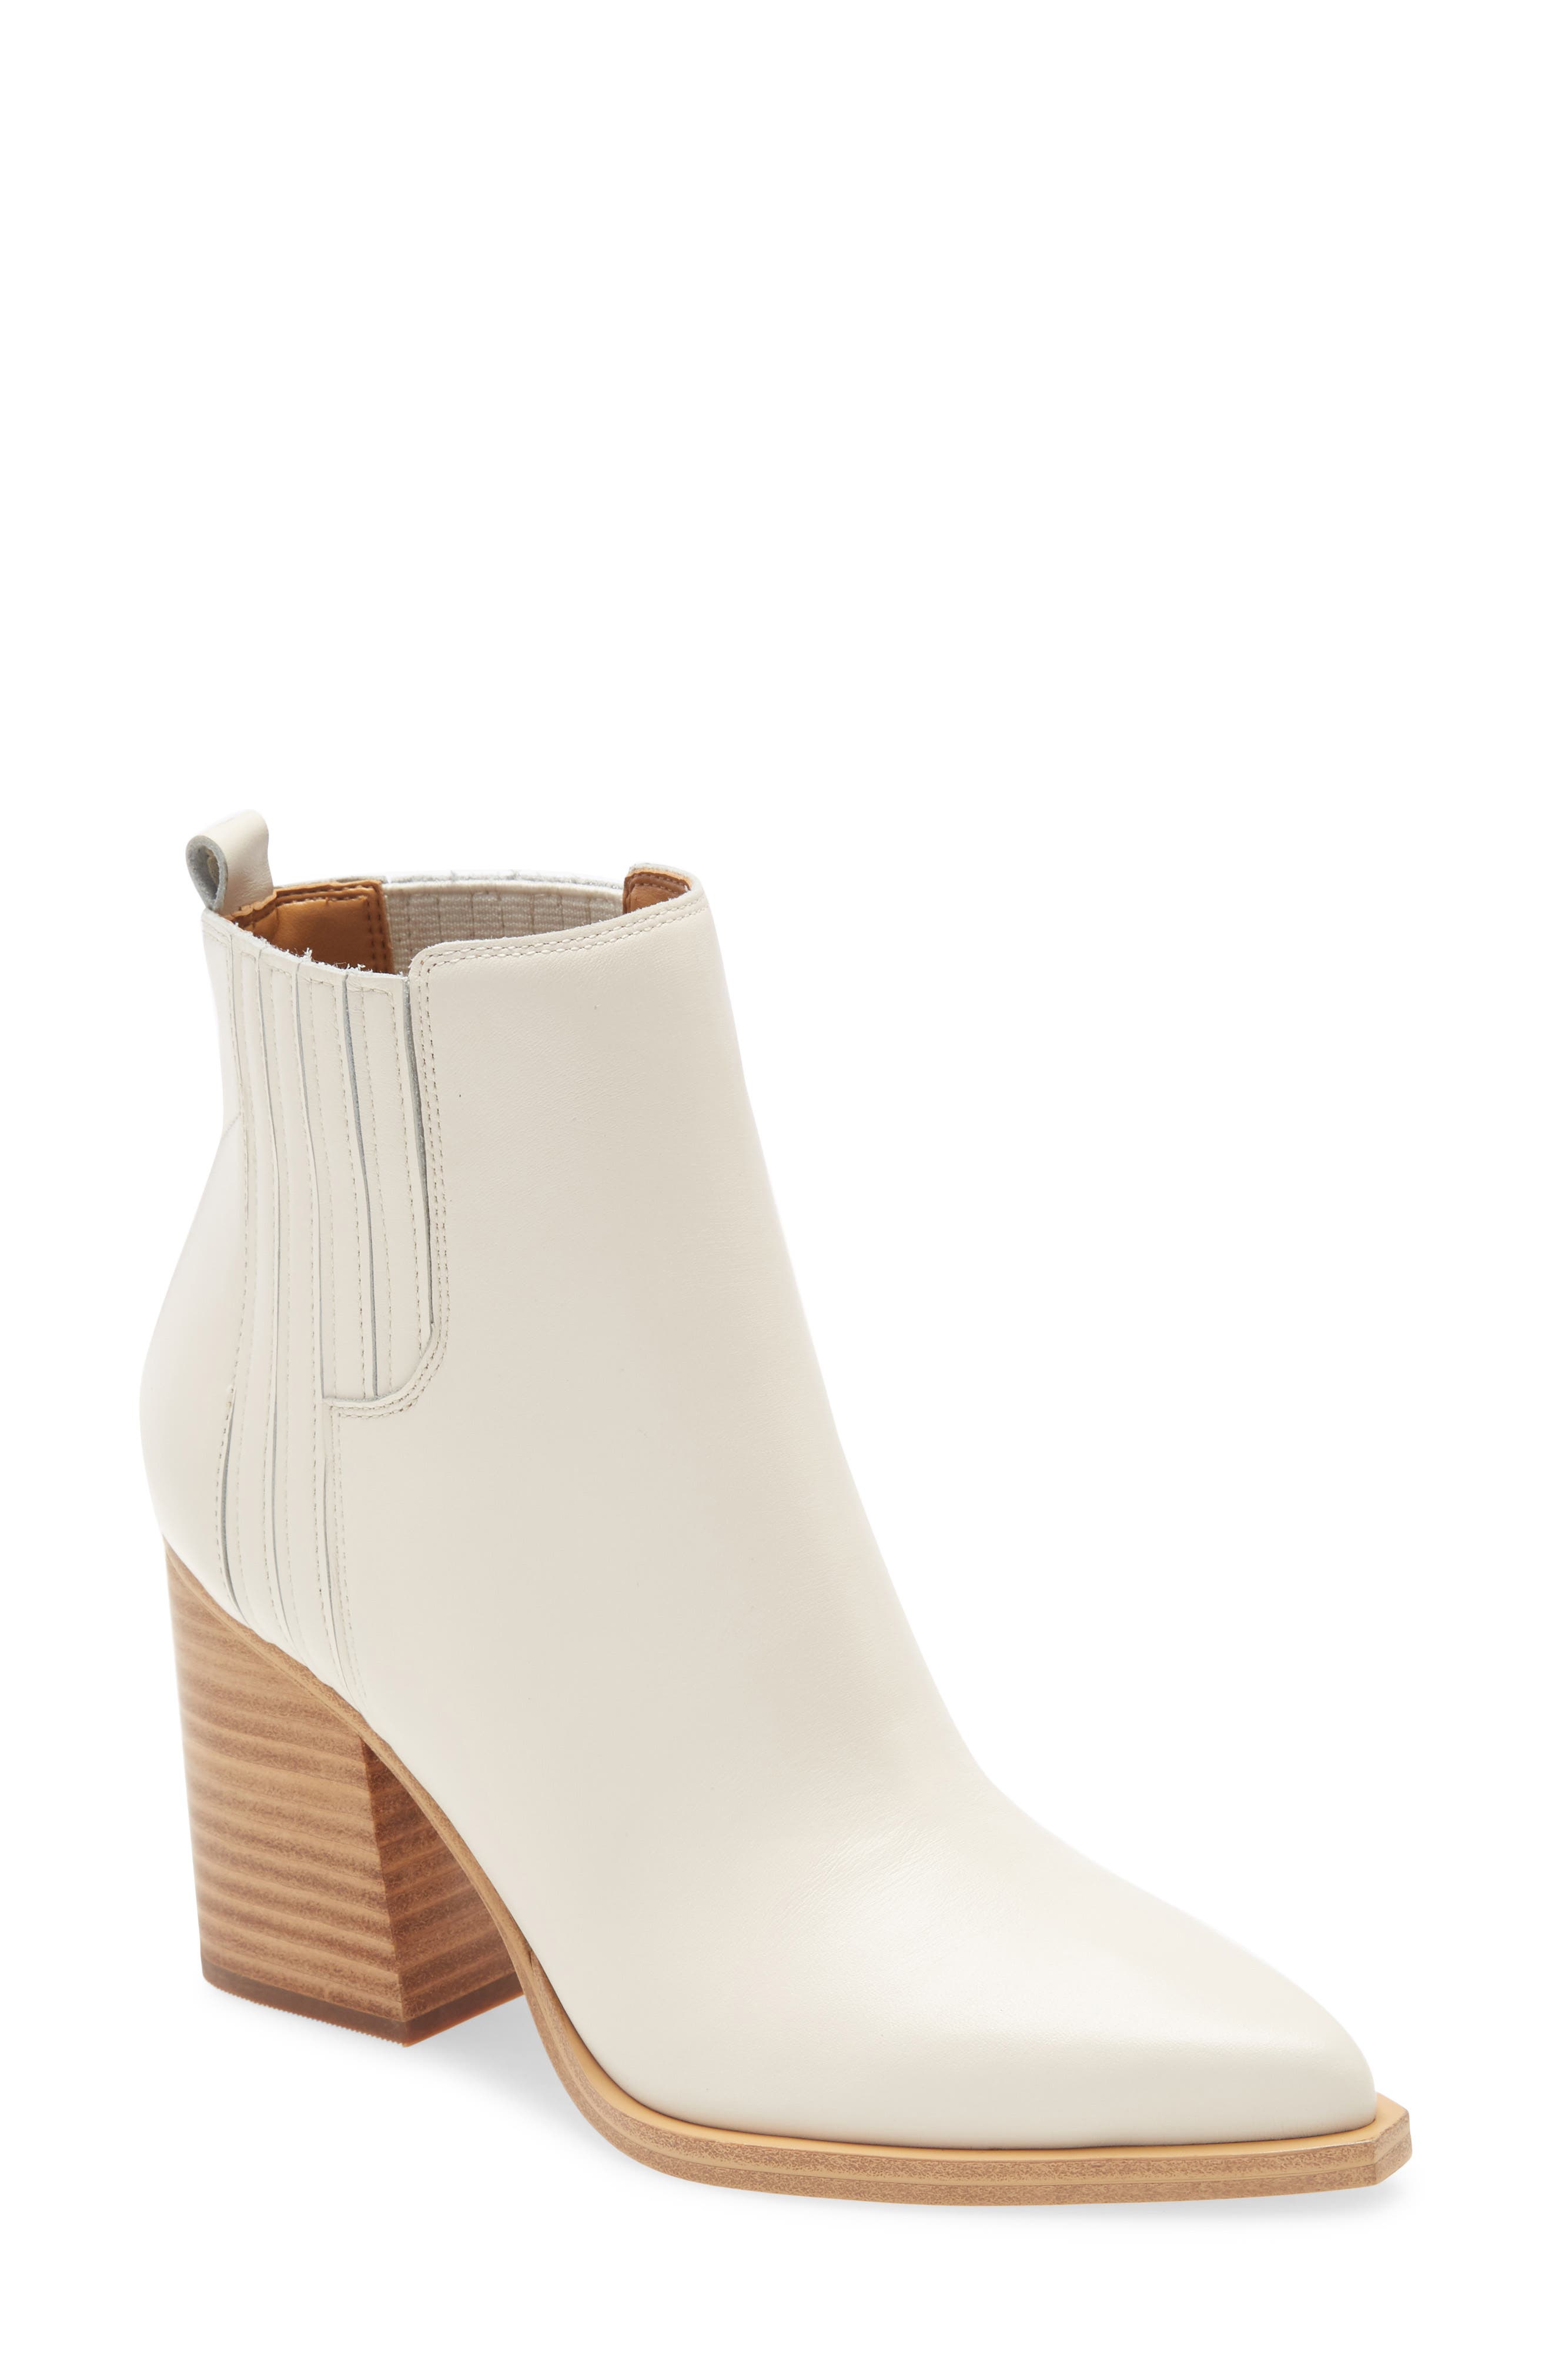 Women's Ivory Booties \u0026 Ankle Boots 